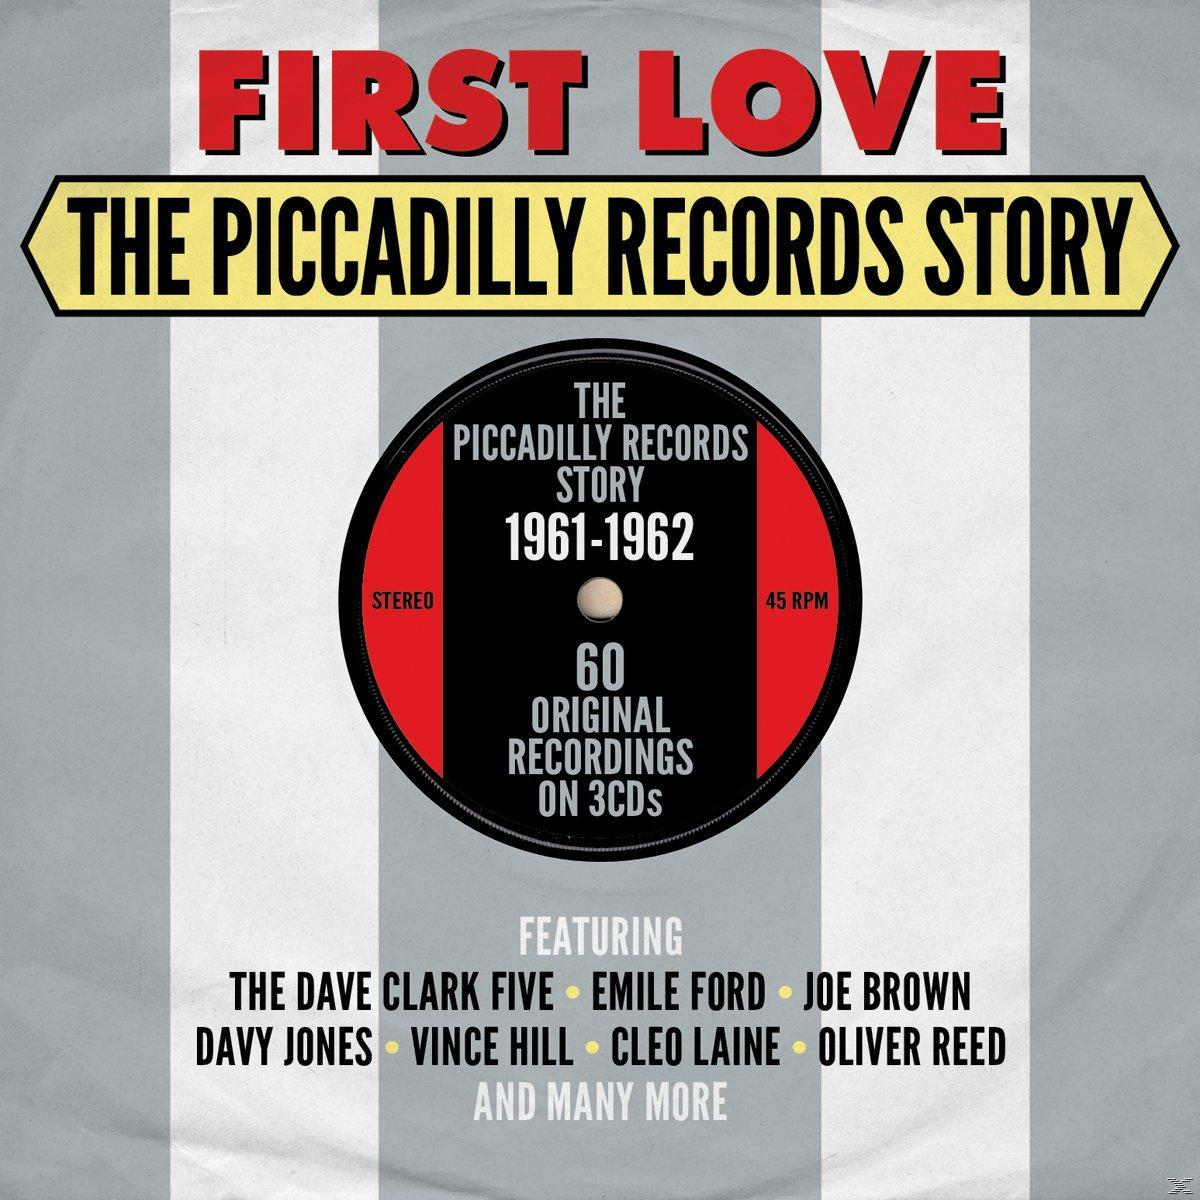 VARIOUS - First - Story Records Picadilly 1961-62 - Love (CD)